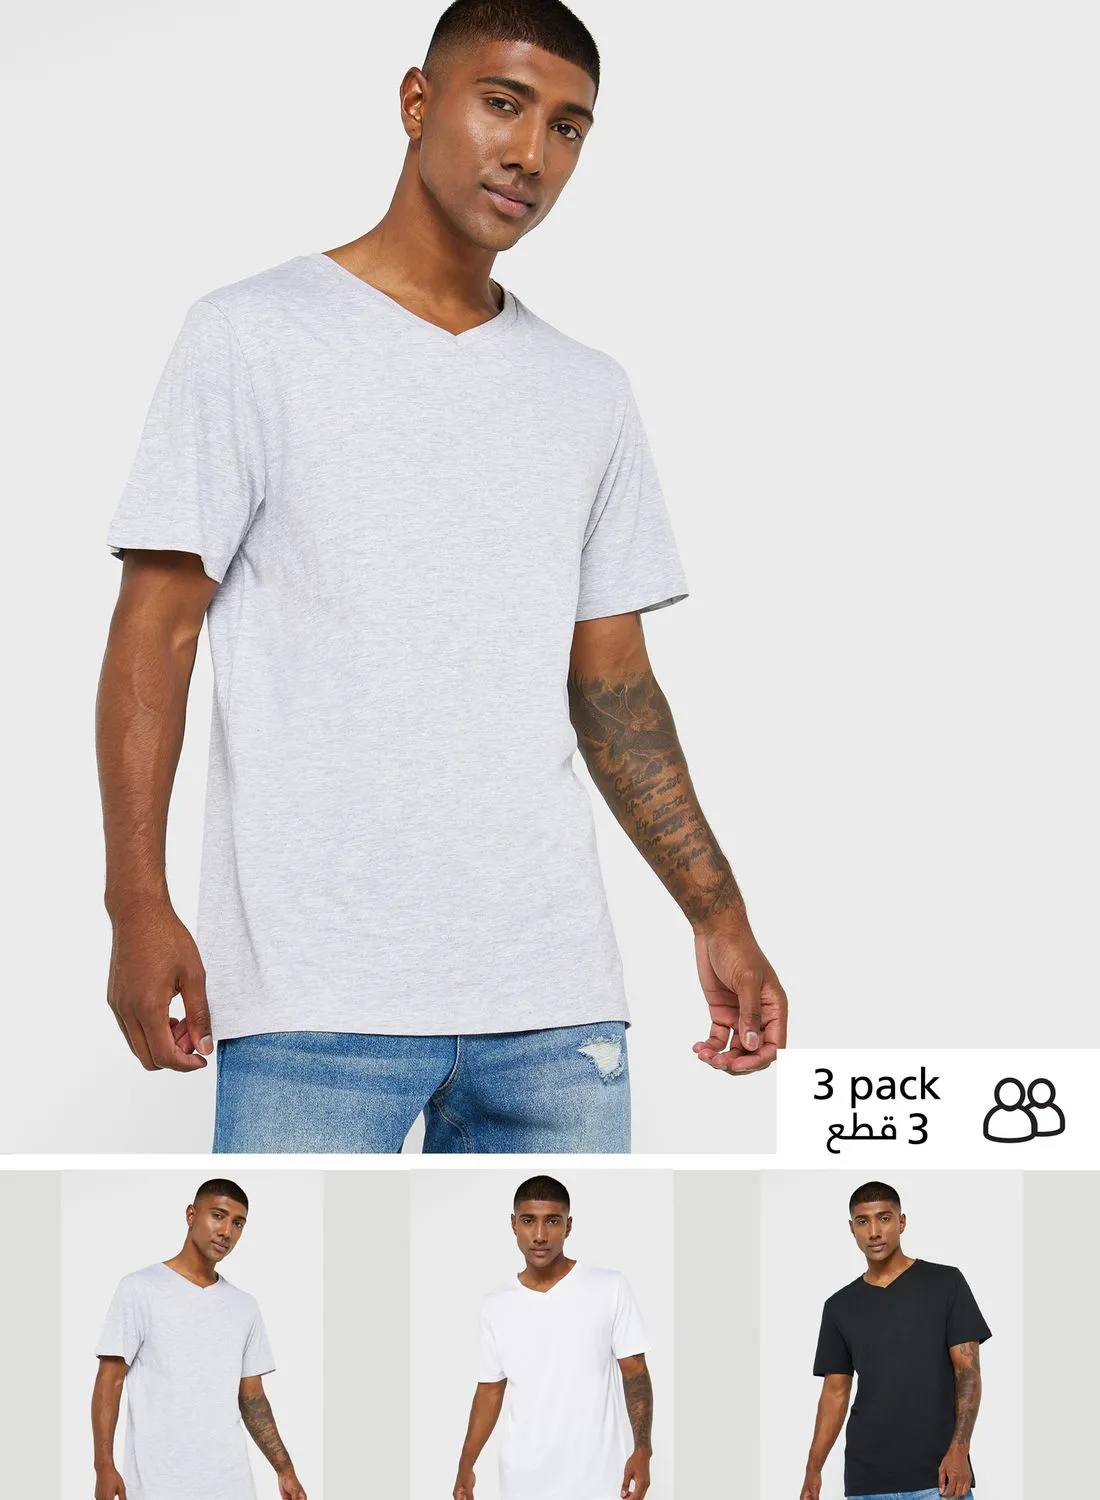 Cotton On 3 Pack Assorted V Neck T-Shirt